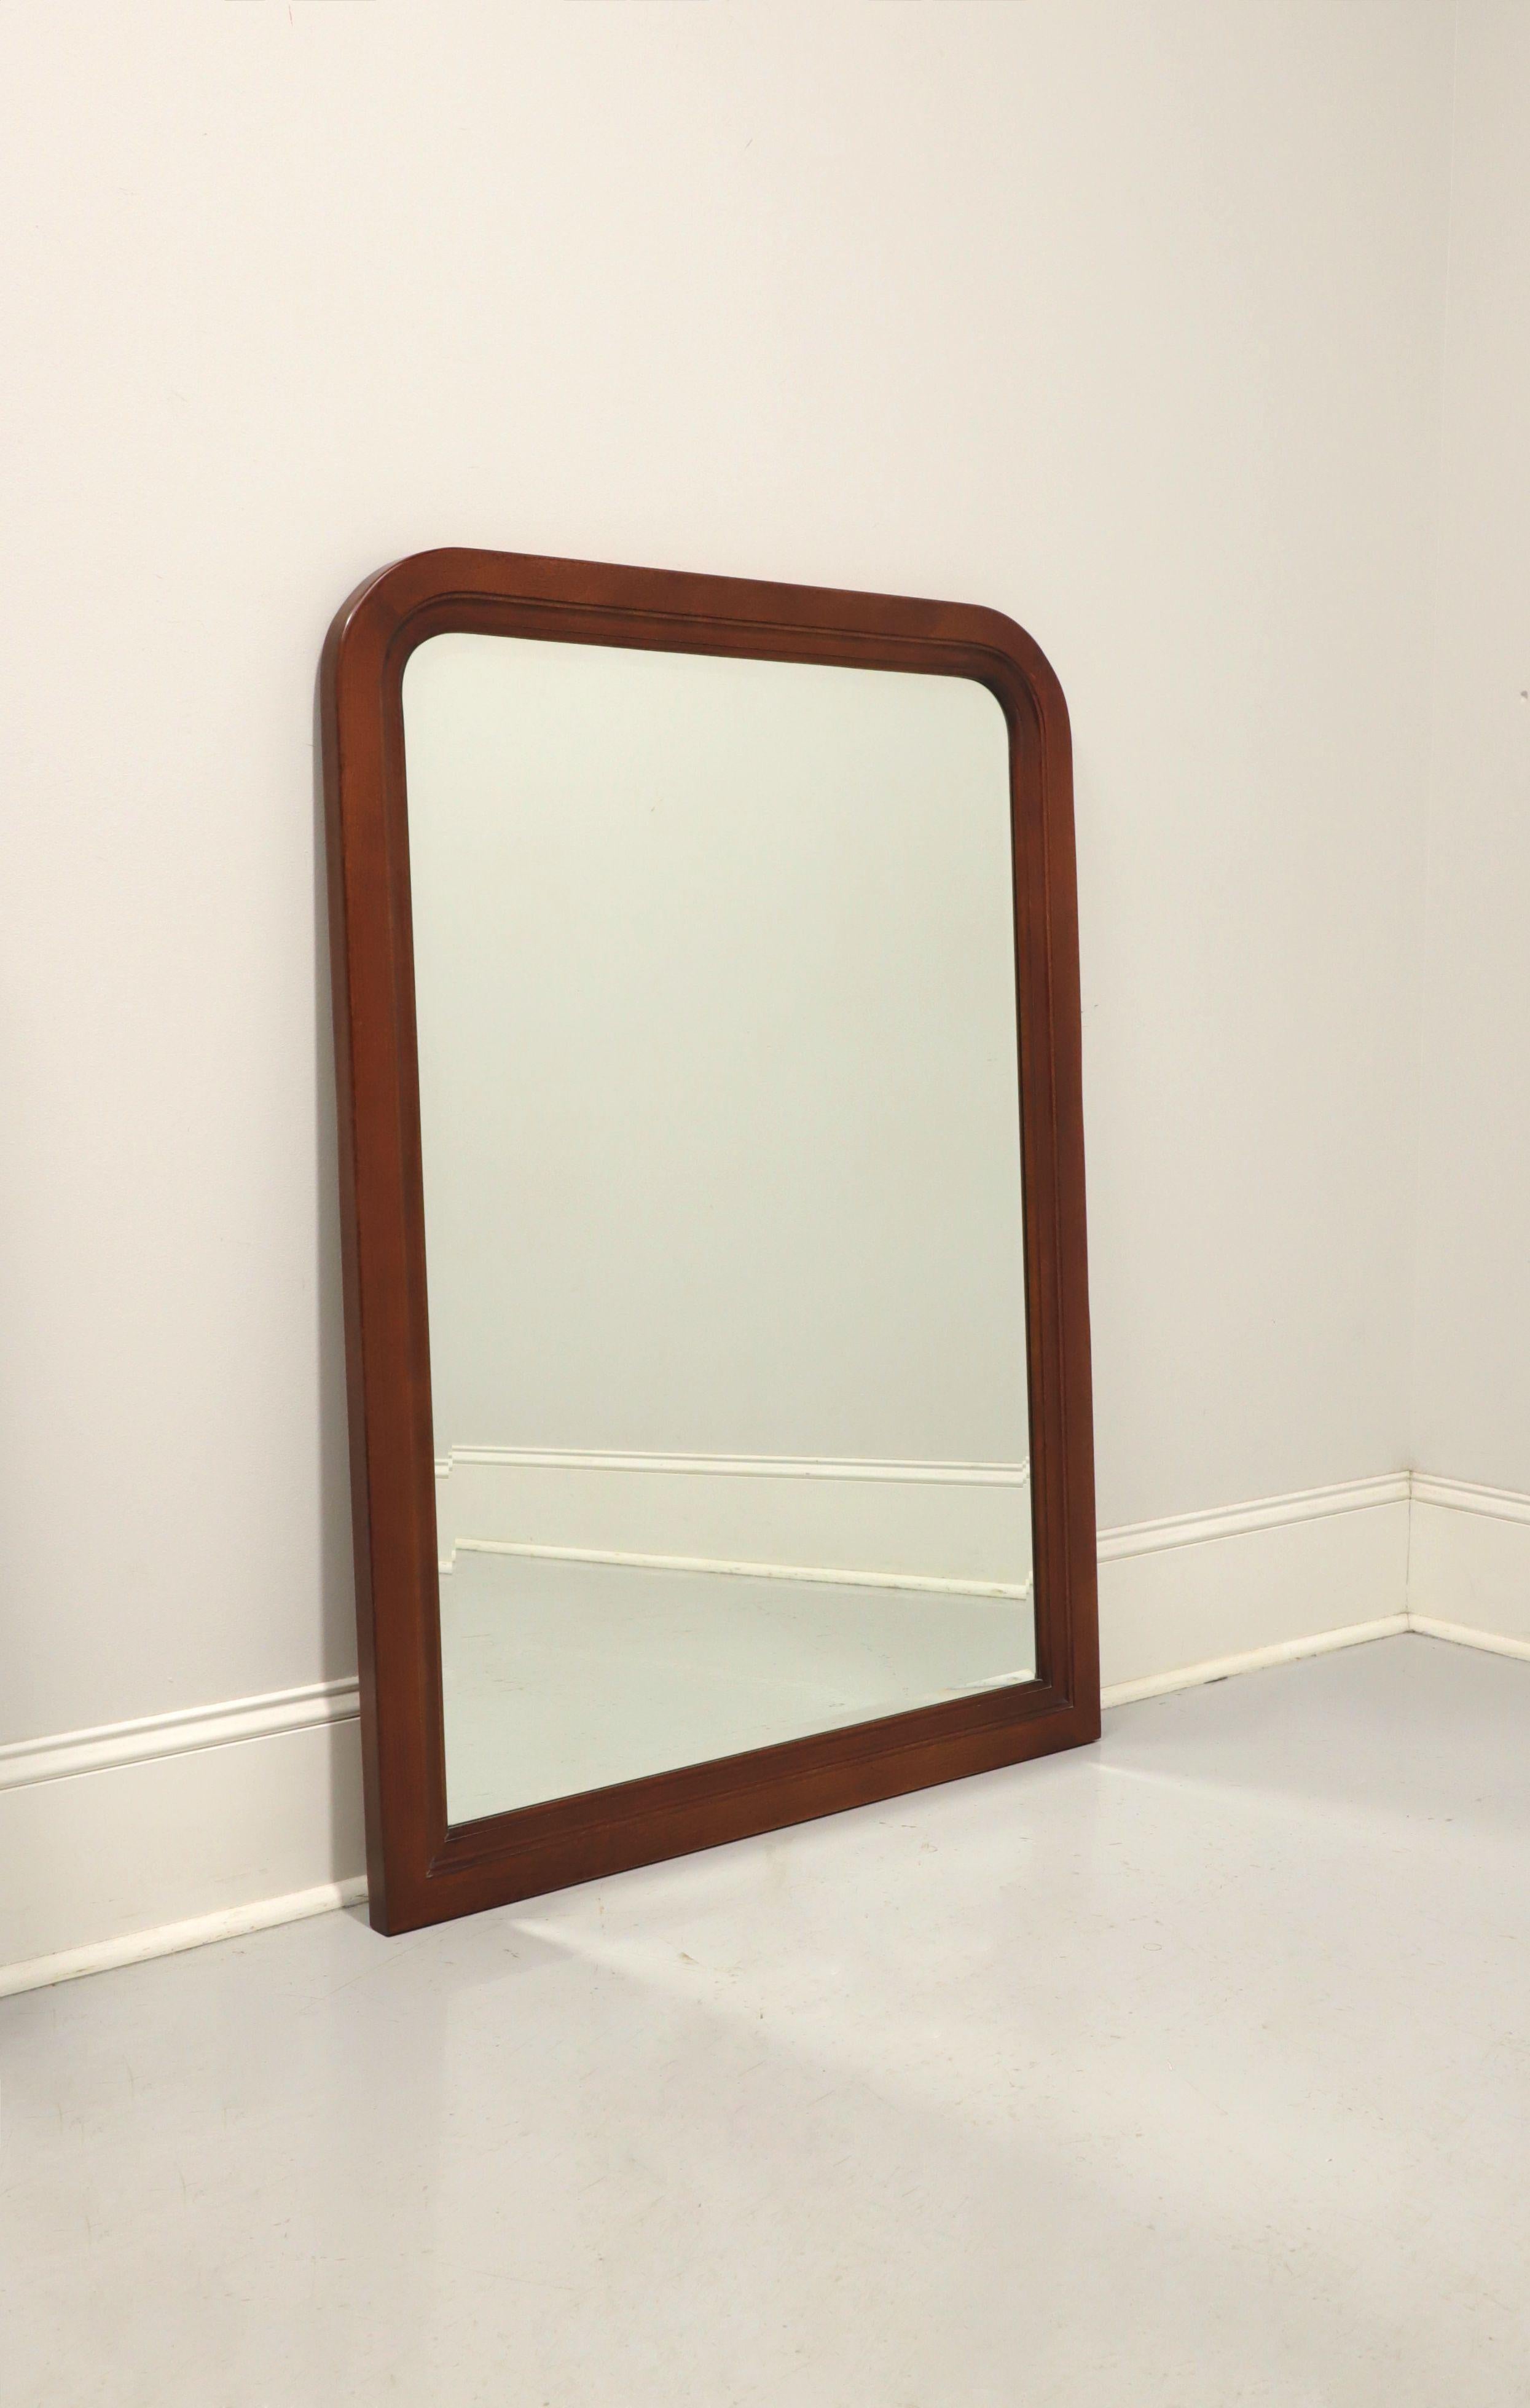 A French Louis Philippe style dresser or wall mirror by Thomasville, from their Impressions Martinique Collection. Beveled mirror glass with a cherry frame and their Merlot finish. Made in Thomasville, North Carolina, USA, in the late 20th Century.